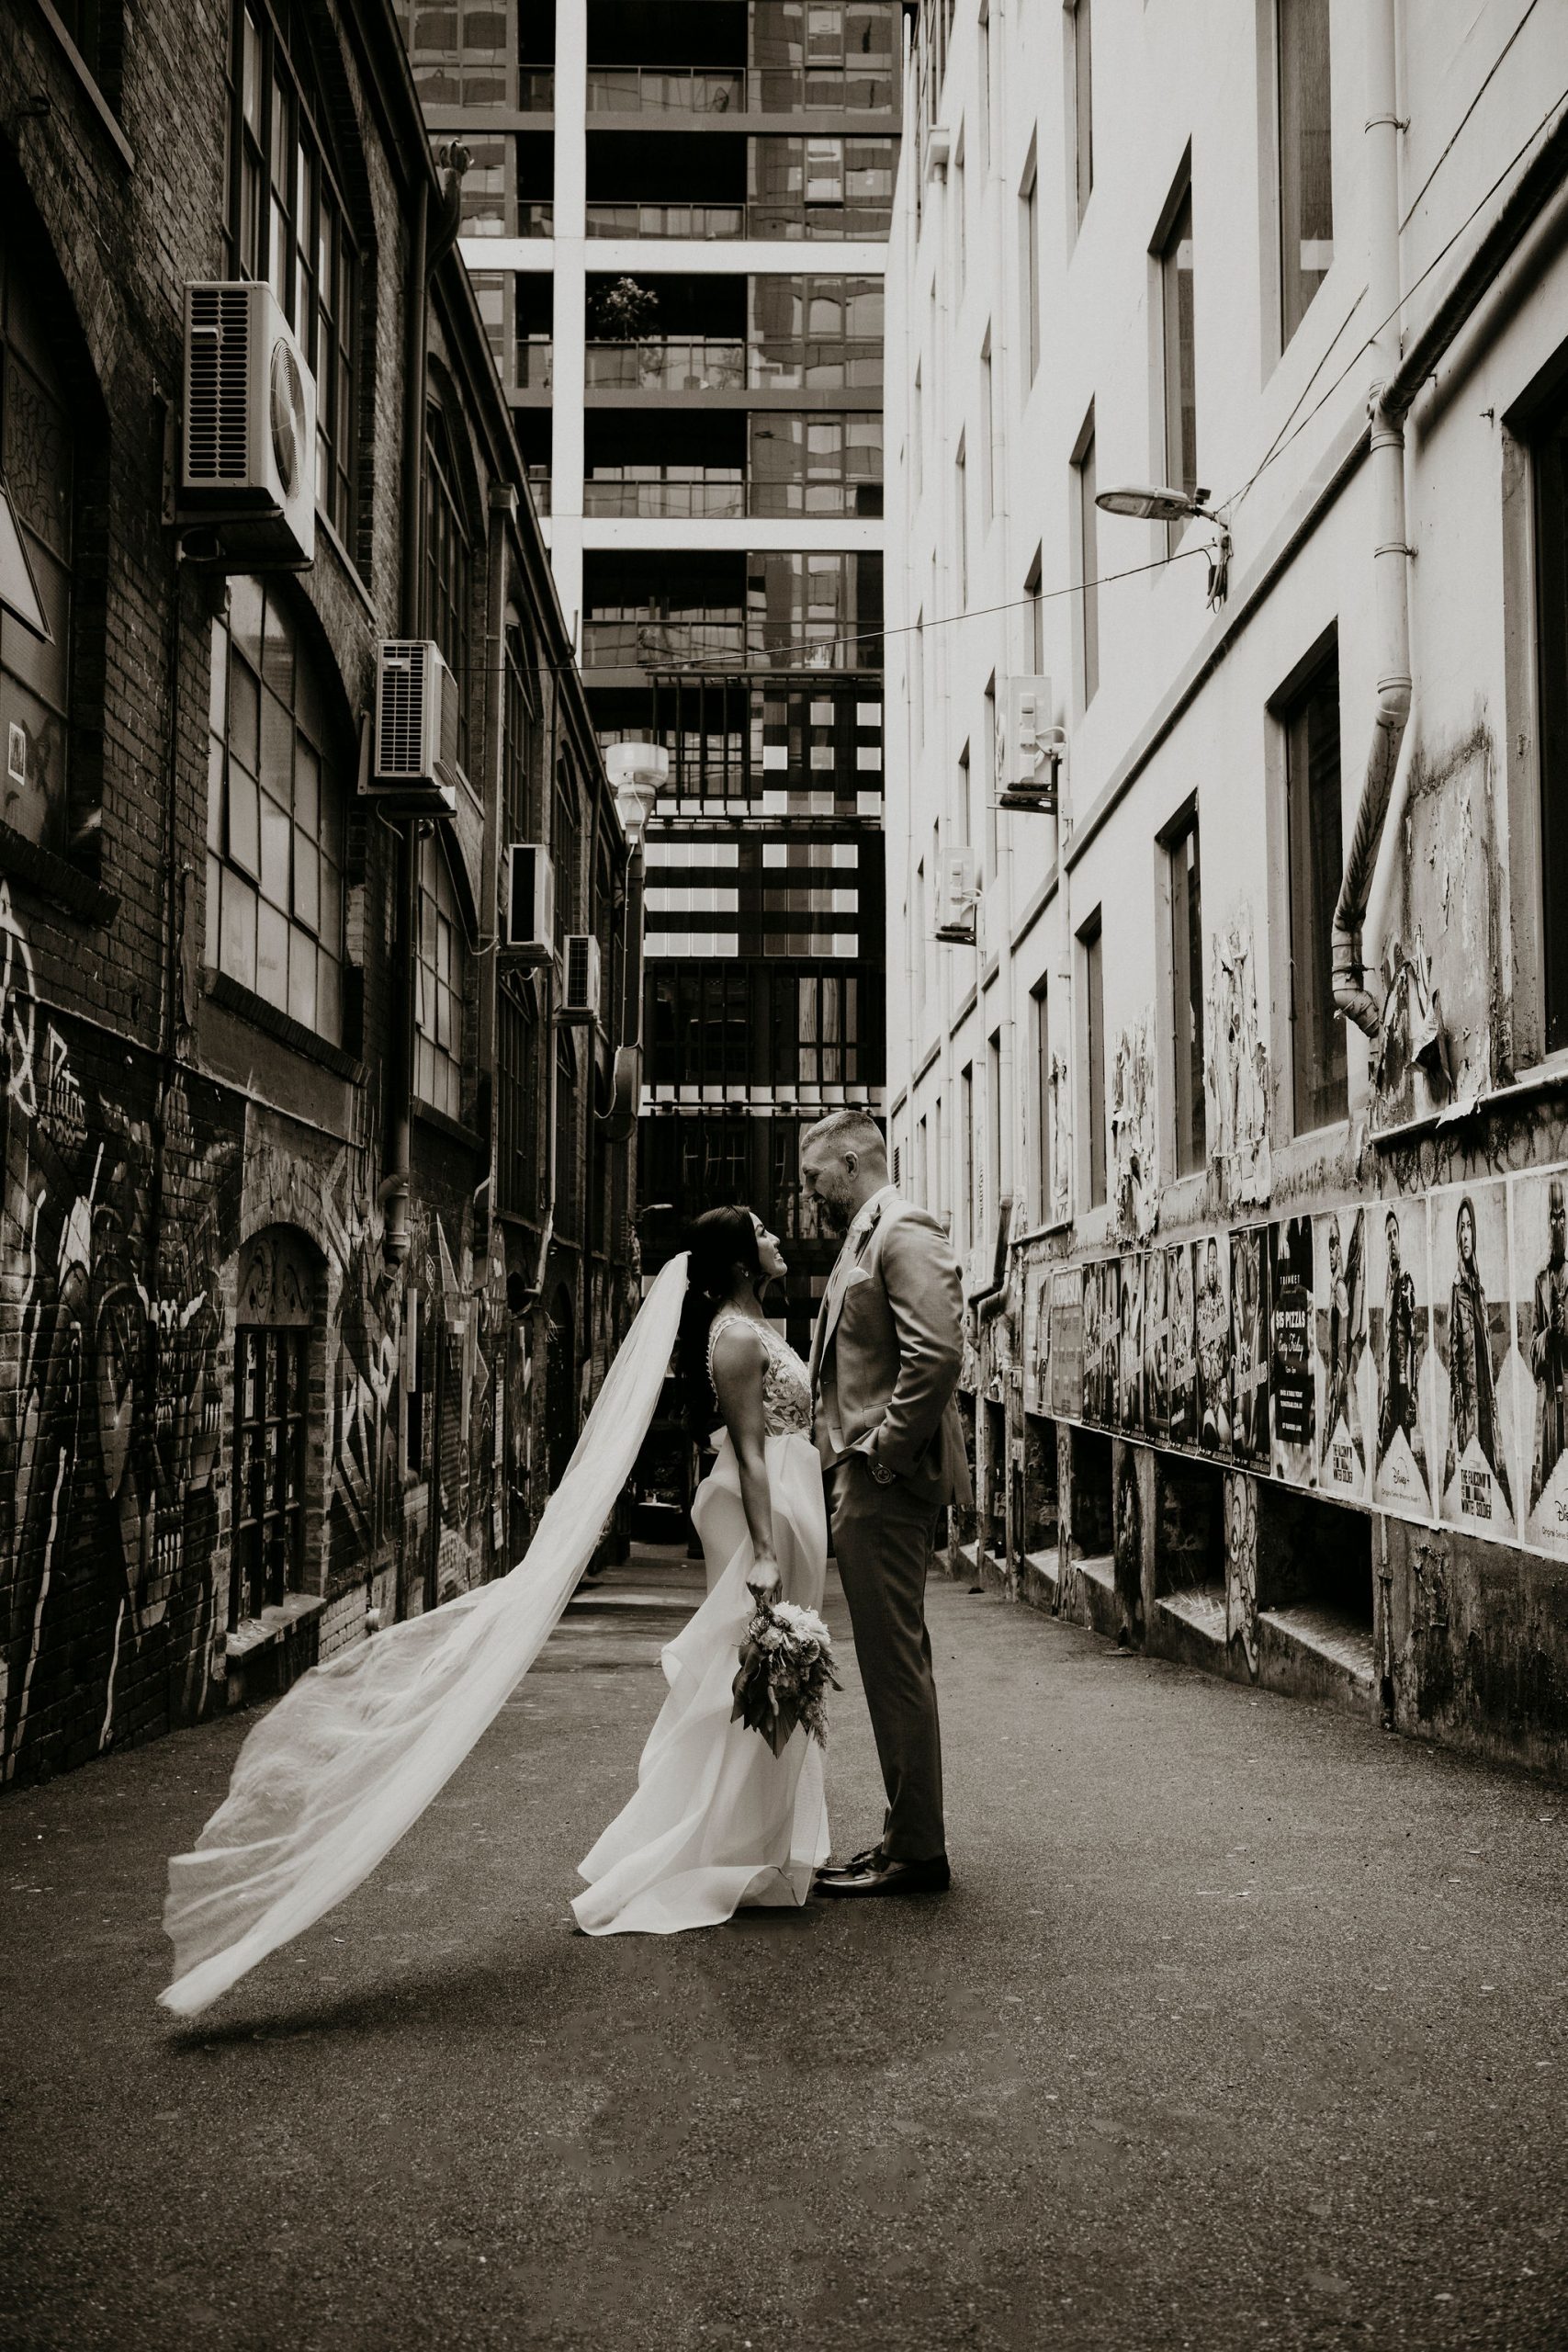 Couple in ACDC Lane vail blows in wind how to elope Intimate Wedding Melbourne Lets Elope Melbourne Celebrant Photographer Elopement Package Victoria Sarah Matler Photography Fitzroy Gardens Melbourne Laneways weddings intimate